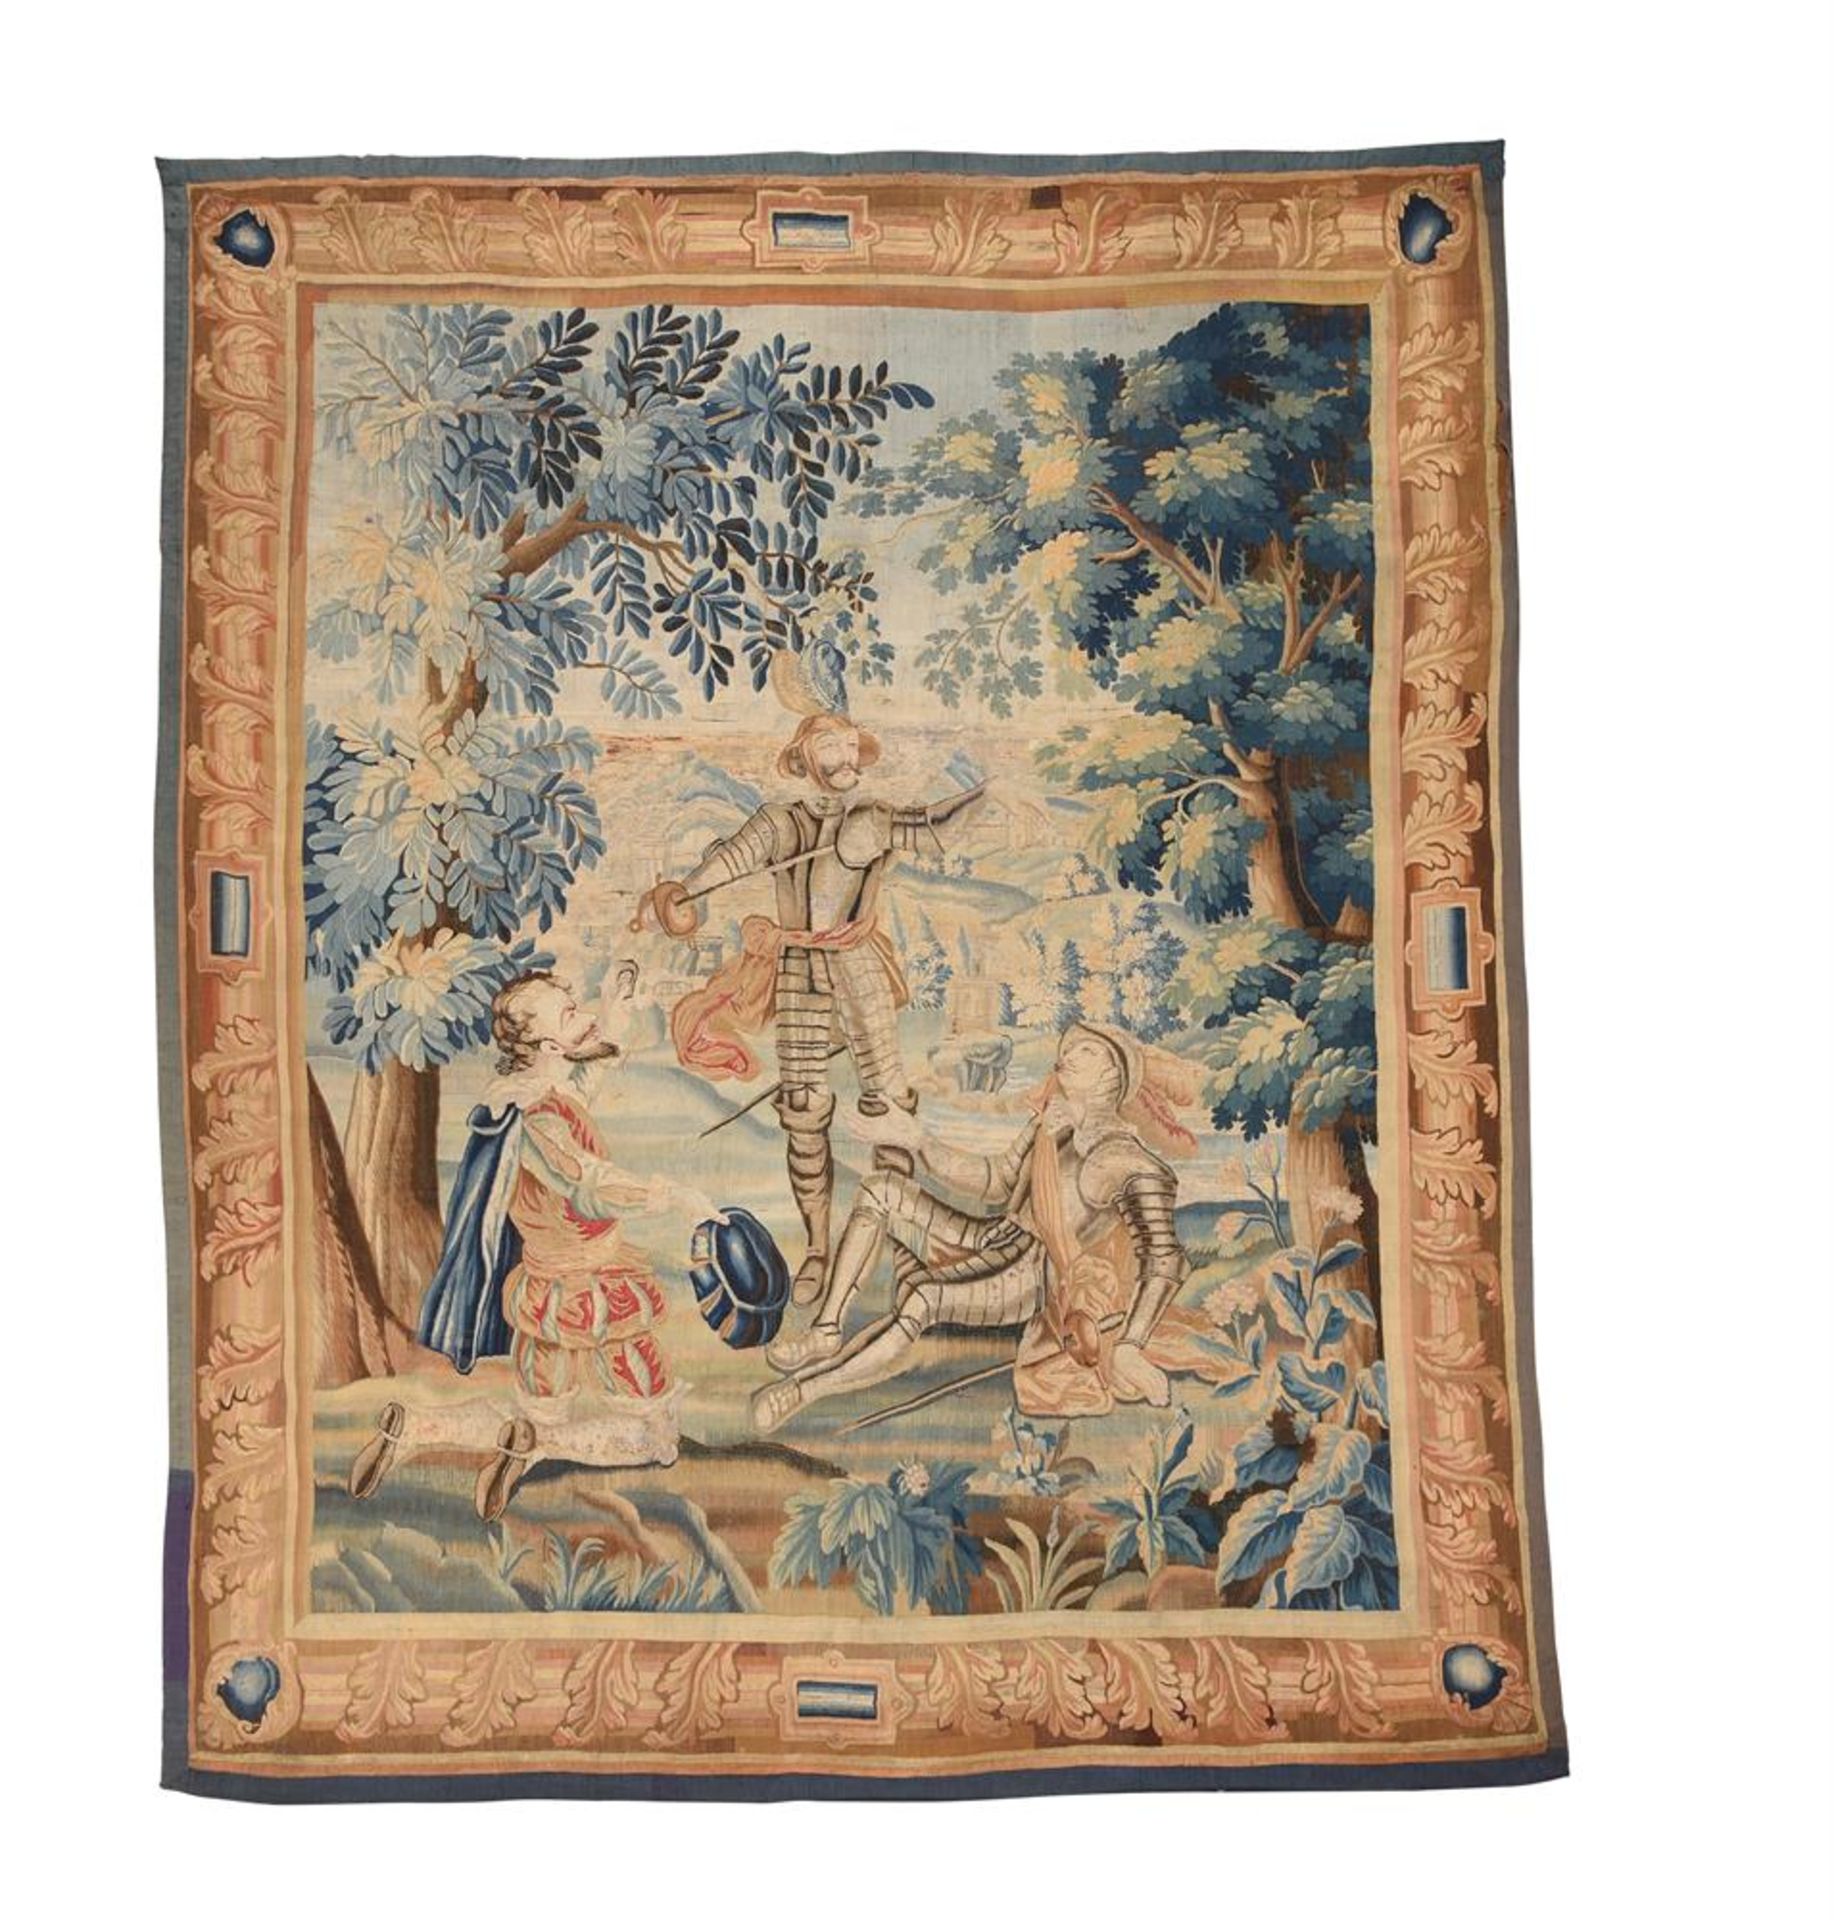 A FLEMISH MYTHOLOGICAL TAPESTRY 'DON QUIXOTE', POSSIBLY LILLE, 18TH CENTURY